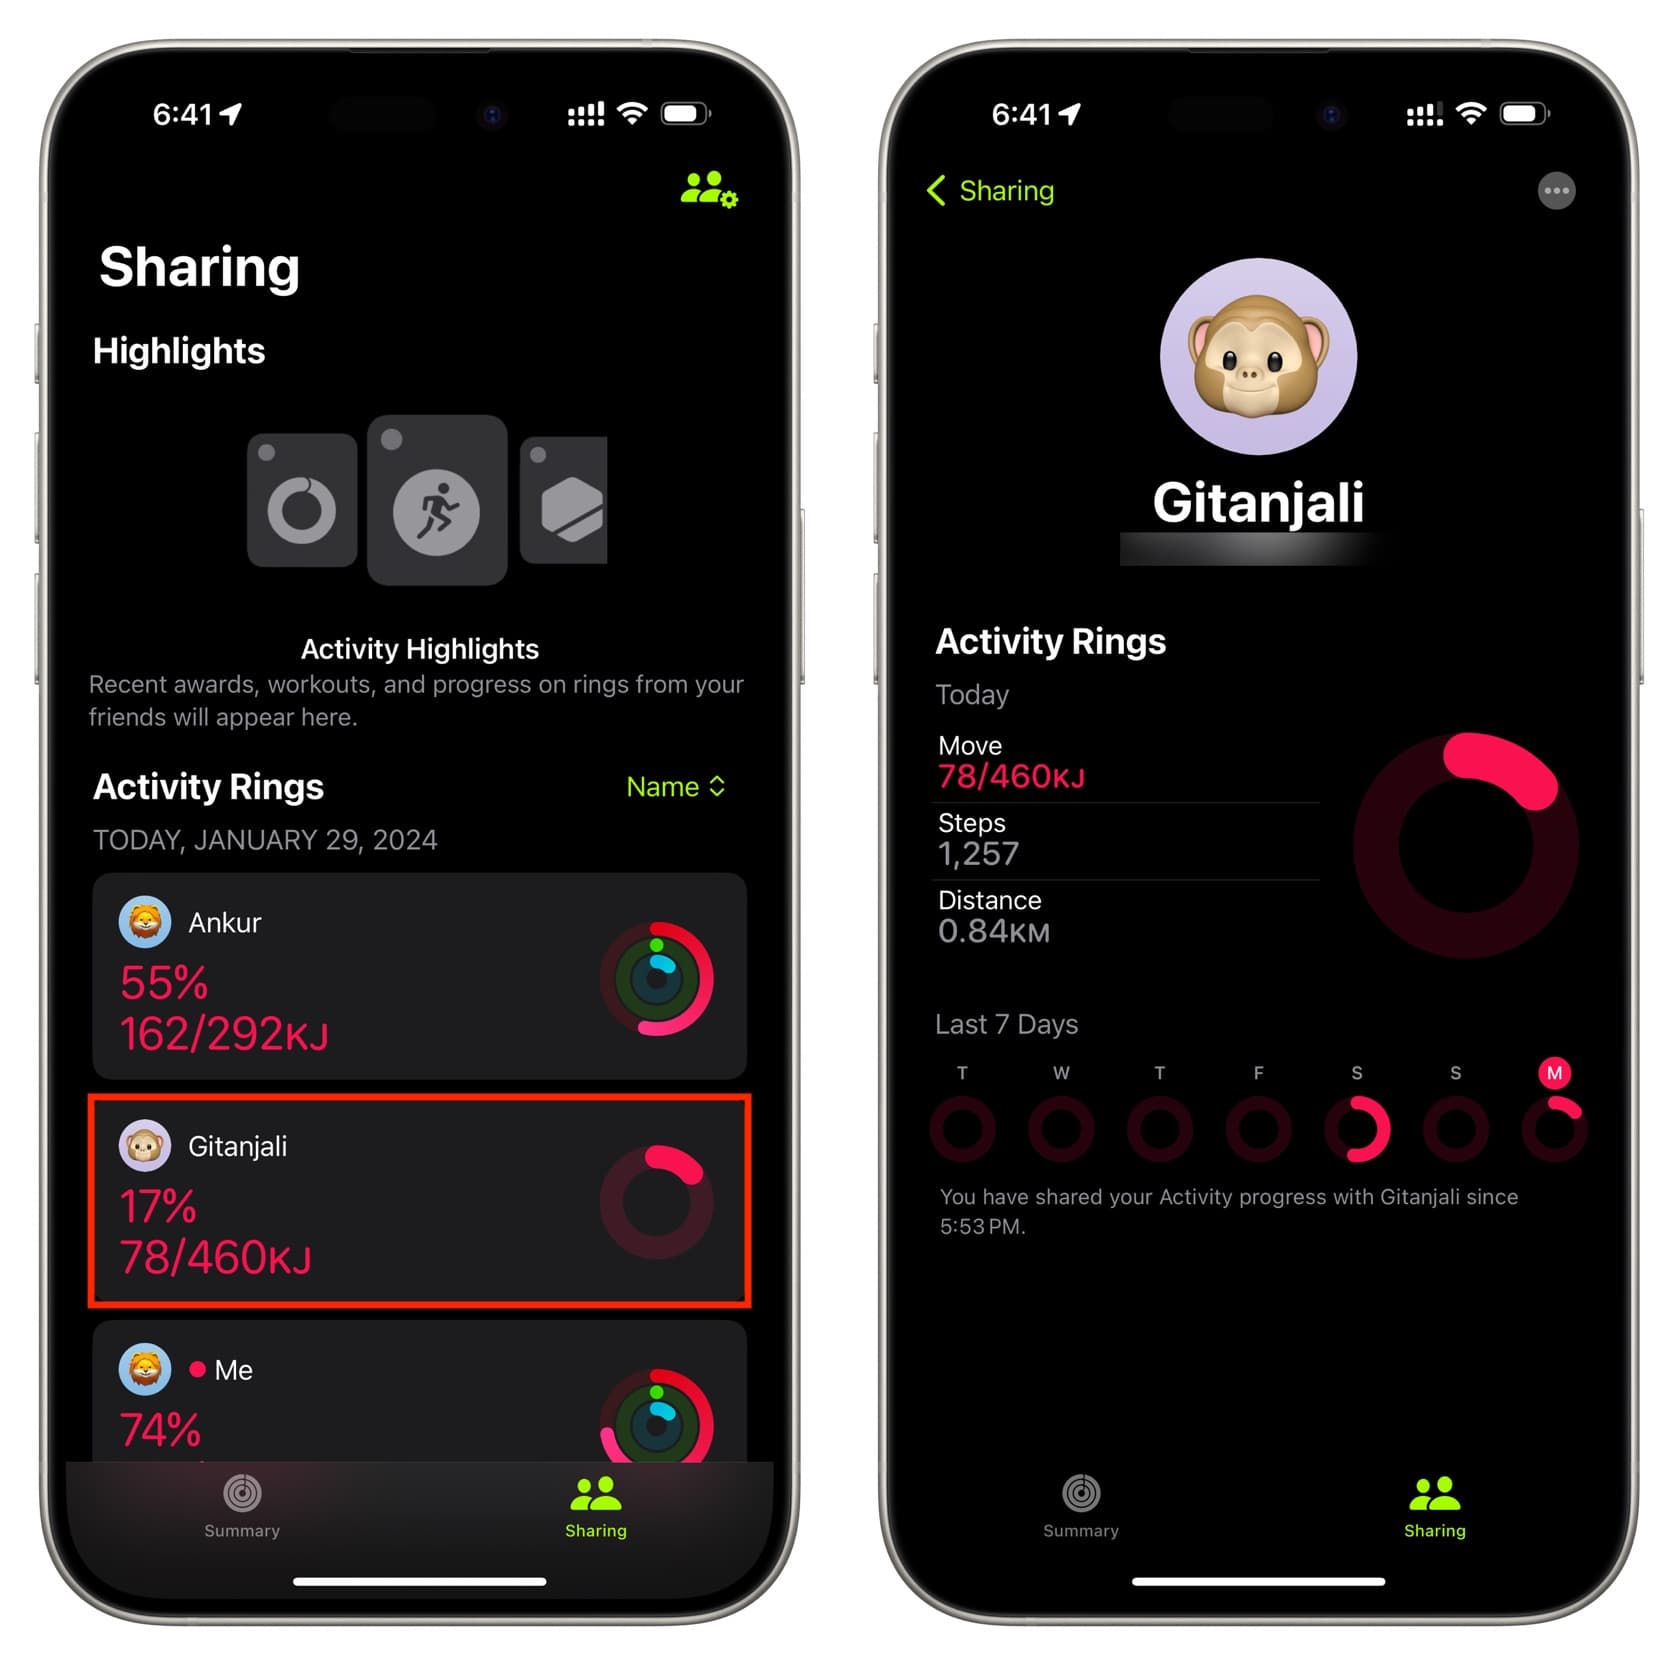 See a friend's activity rings on your iPhone